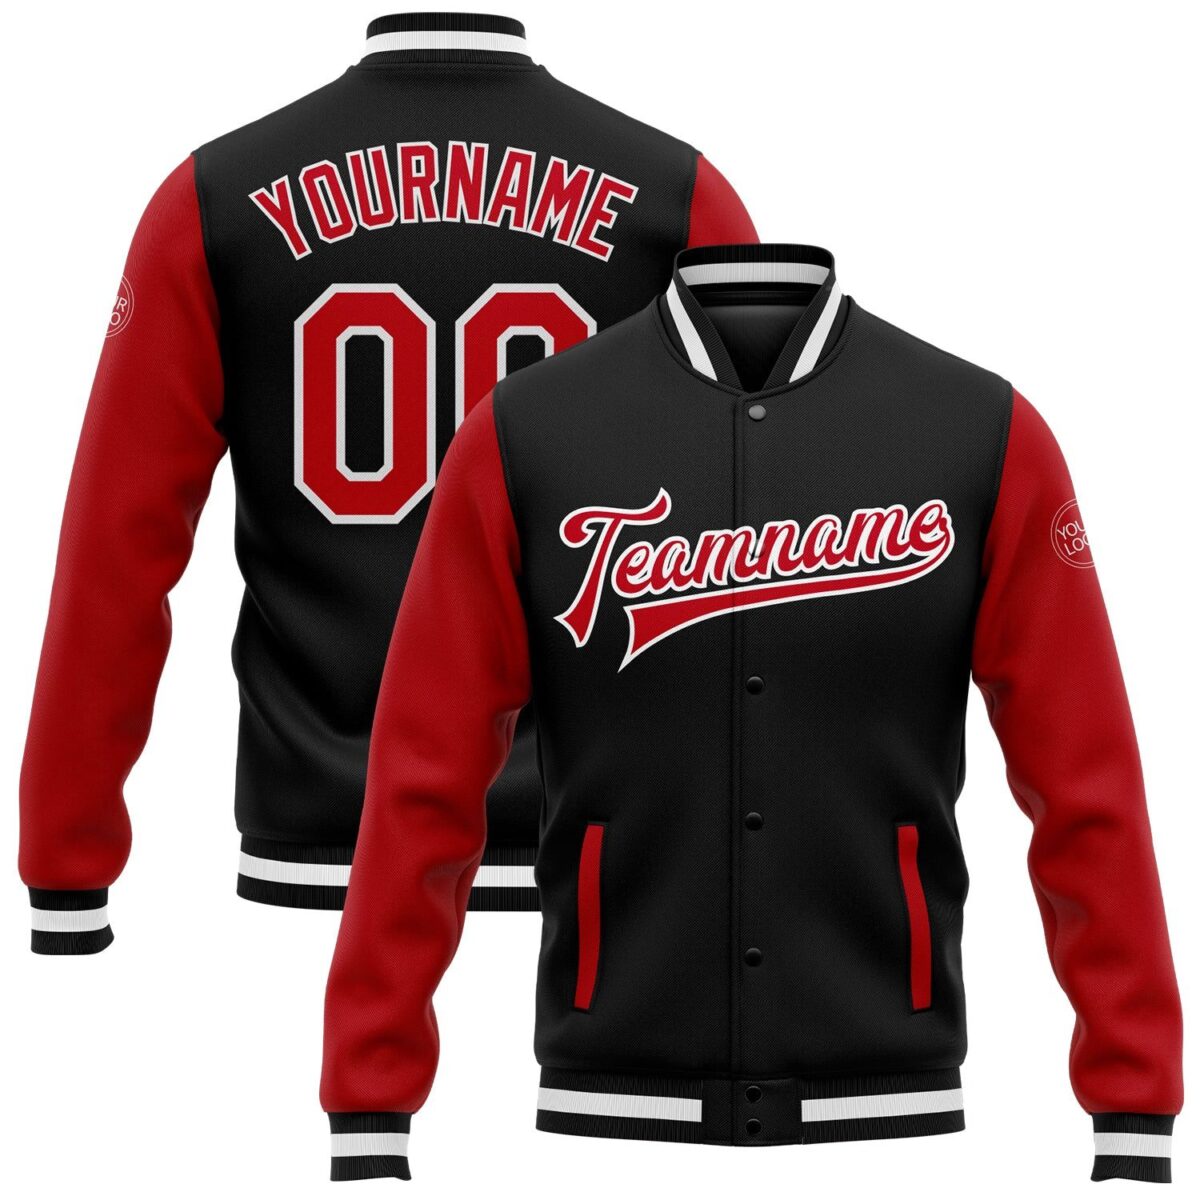 College Student Baseball Jackets with Black & Red 1